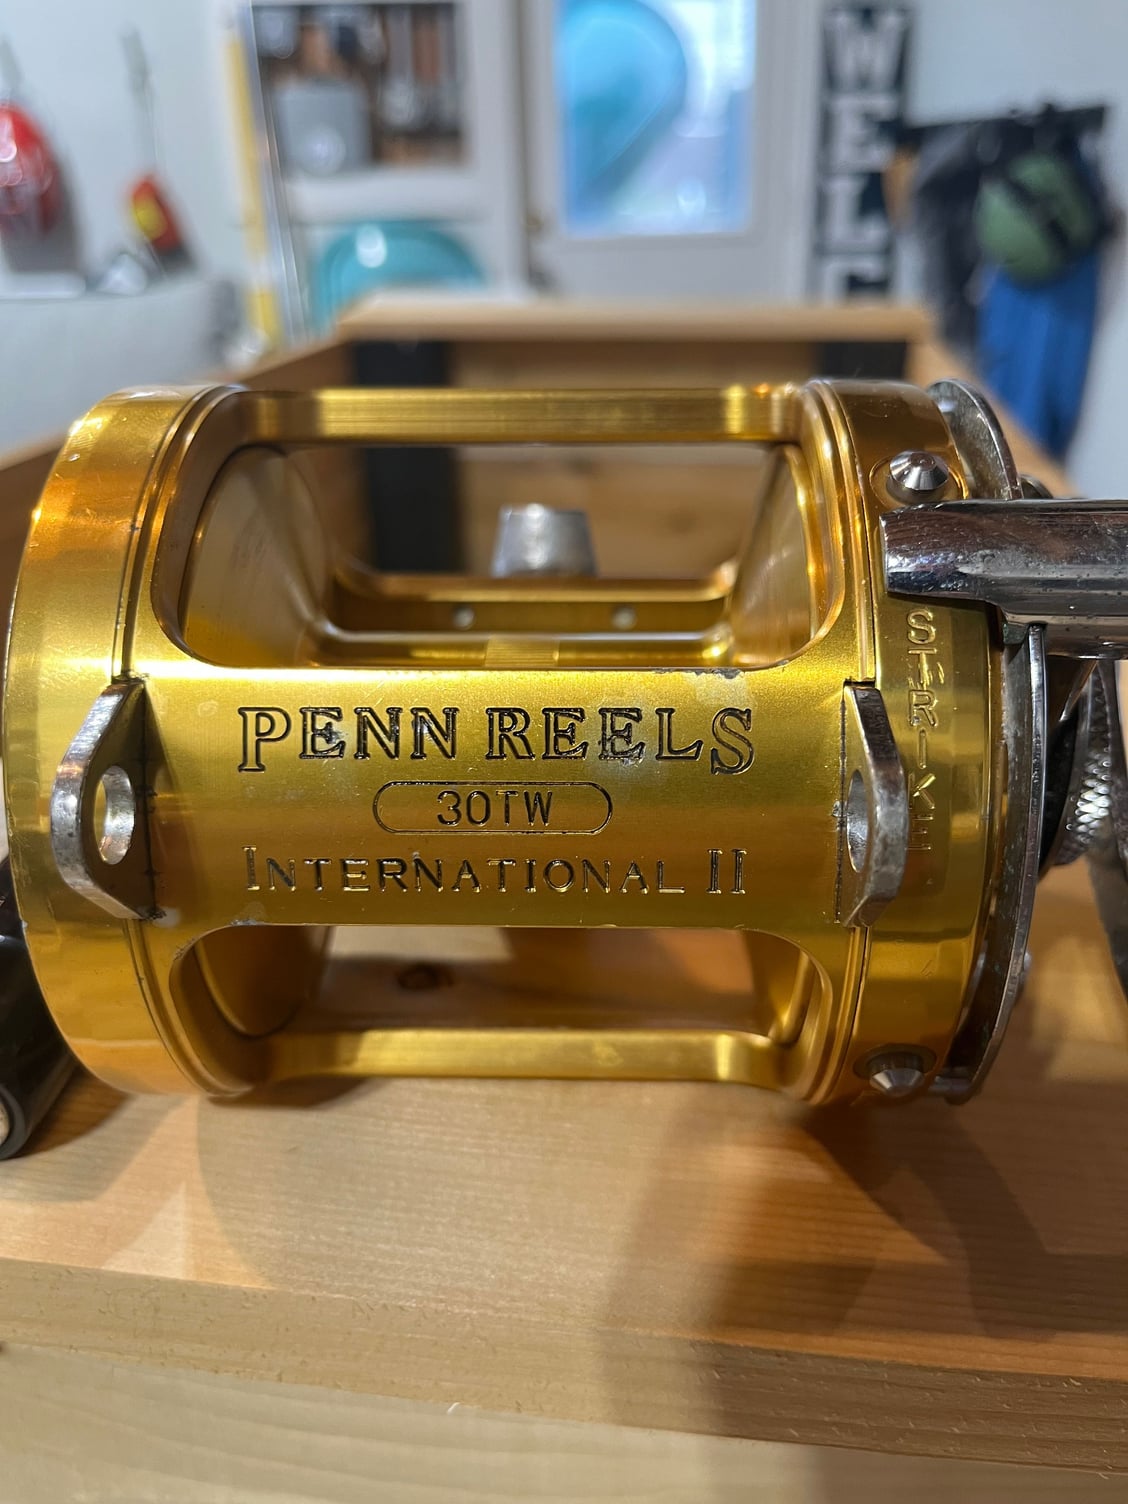 Used Penn reels for sale - The Hull Truth - Boating and Fishing Forum